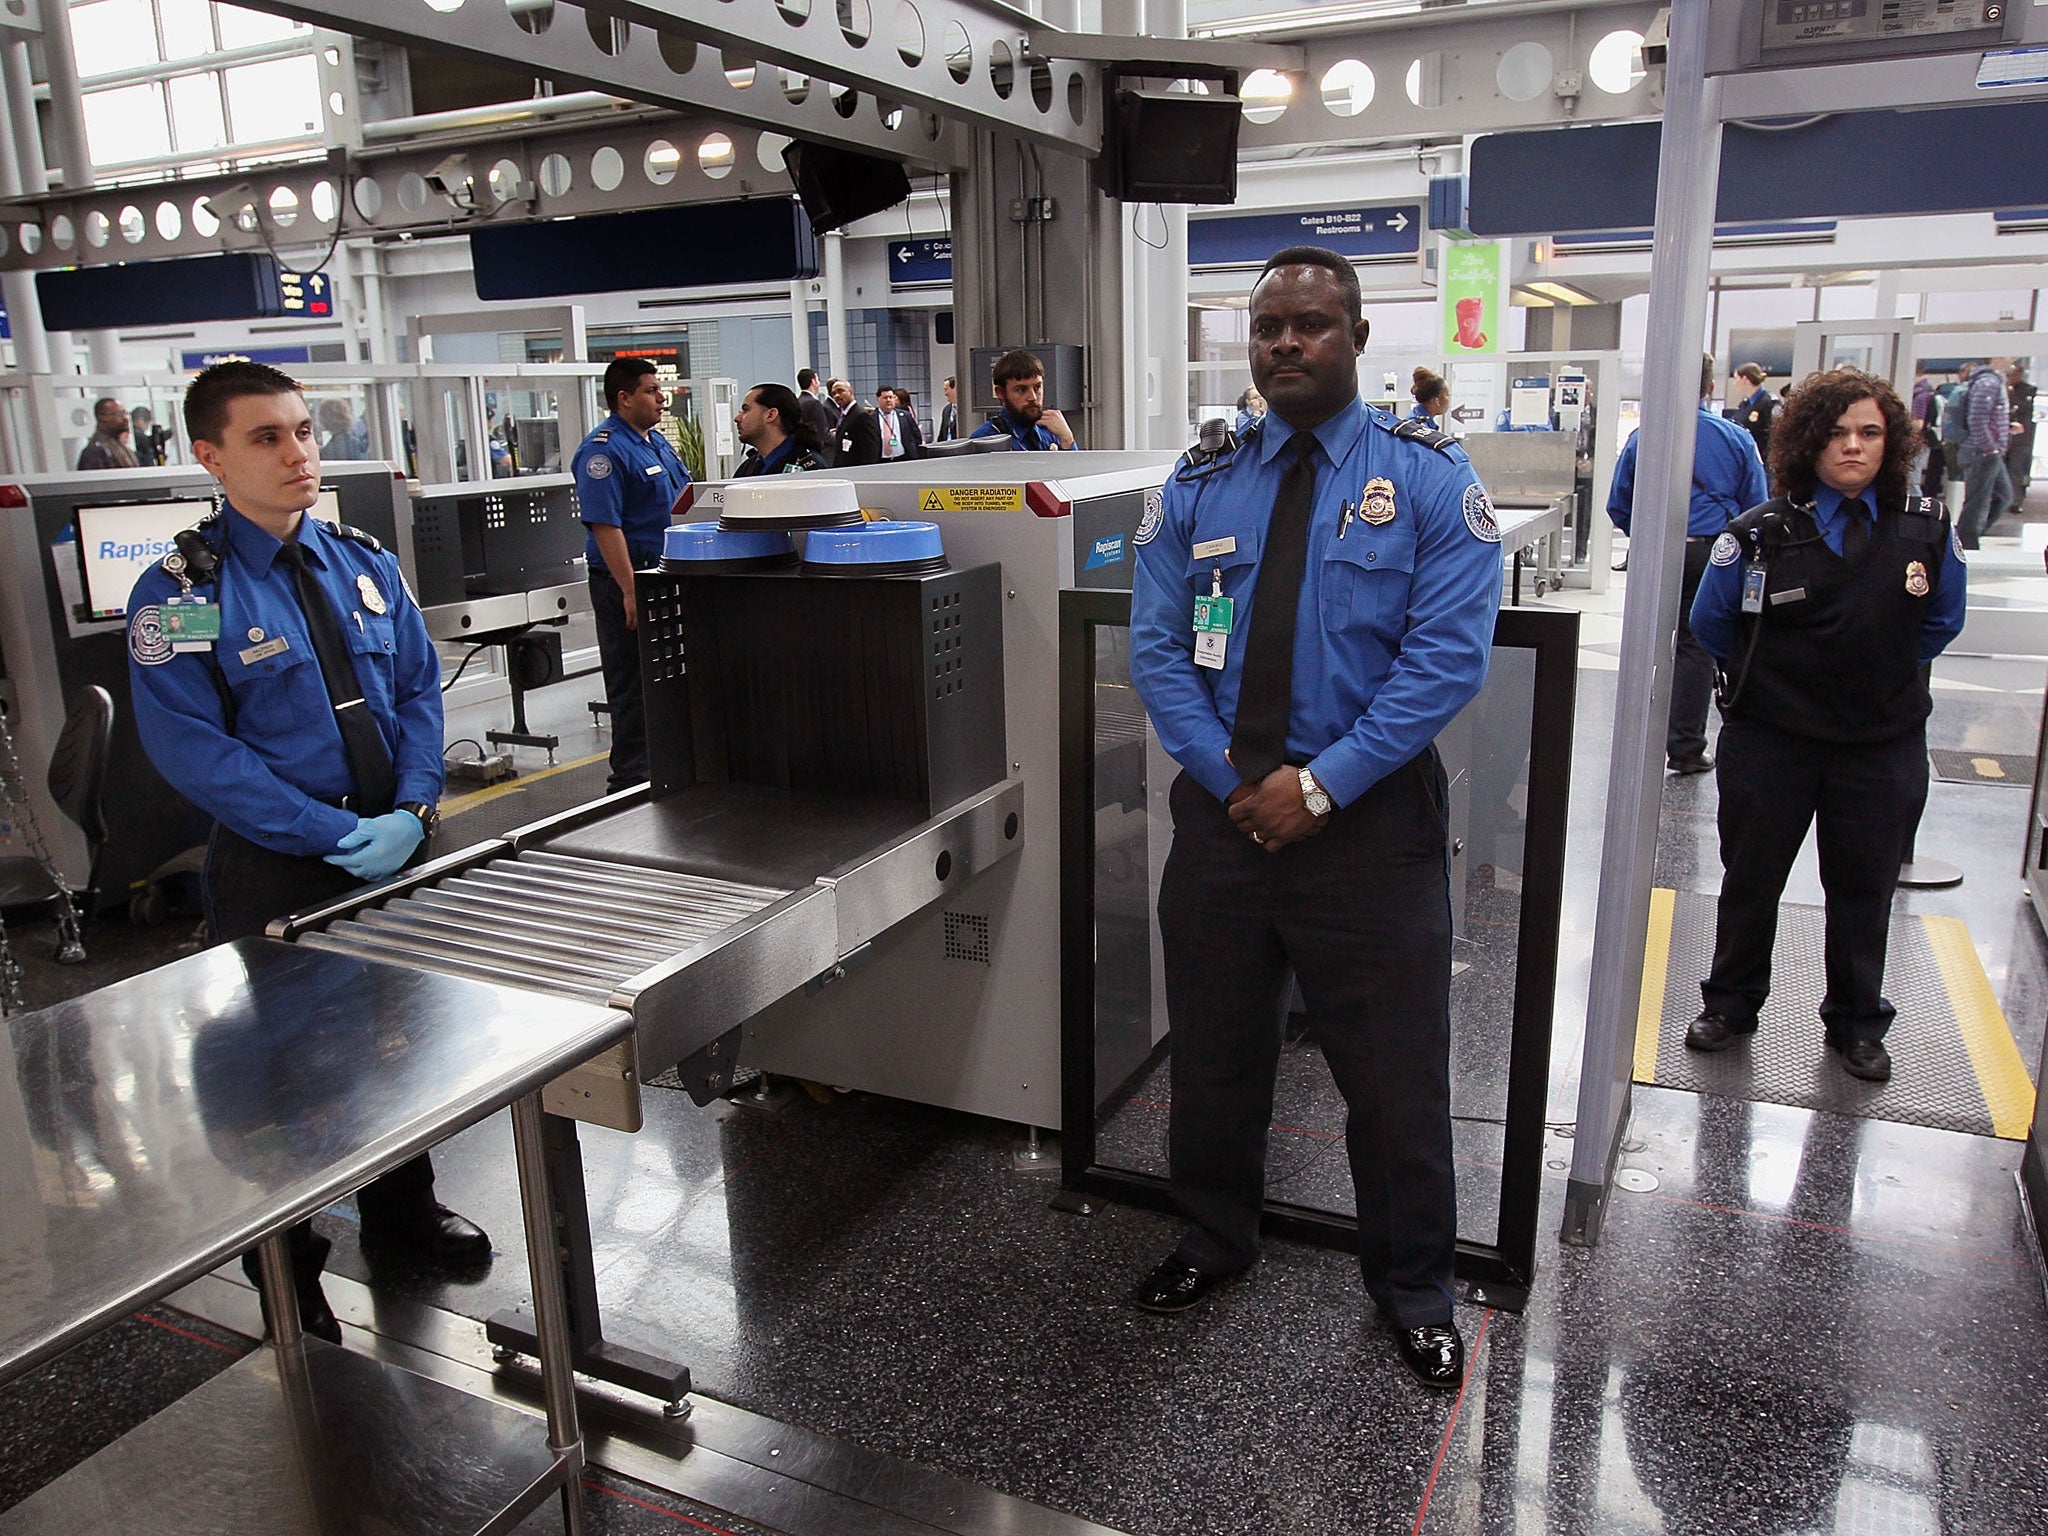 File: Security officers at a checkpoint at O'Hare International Airport in Chicago, Illinois